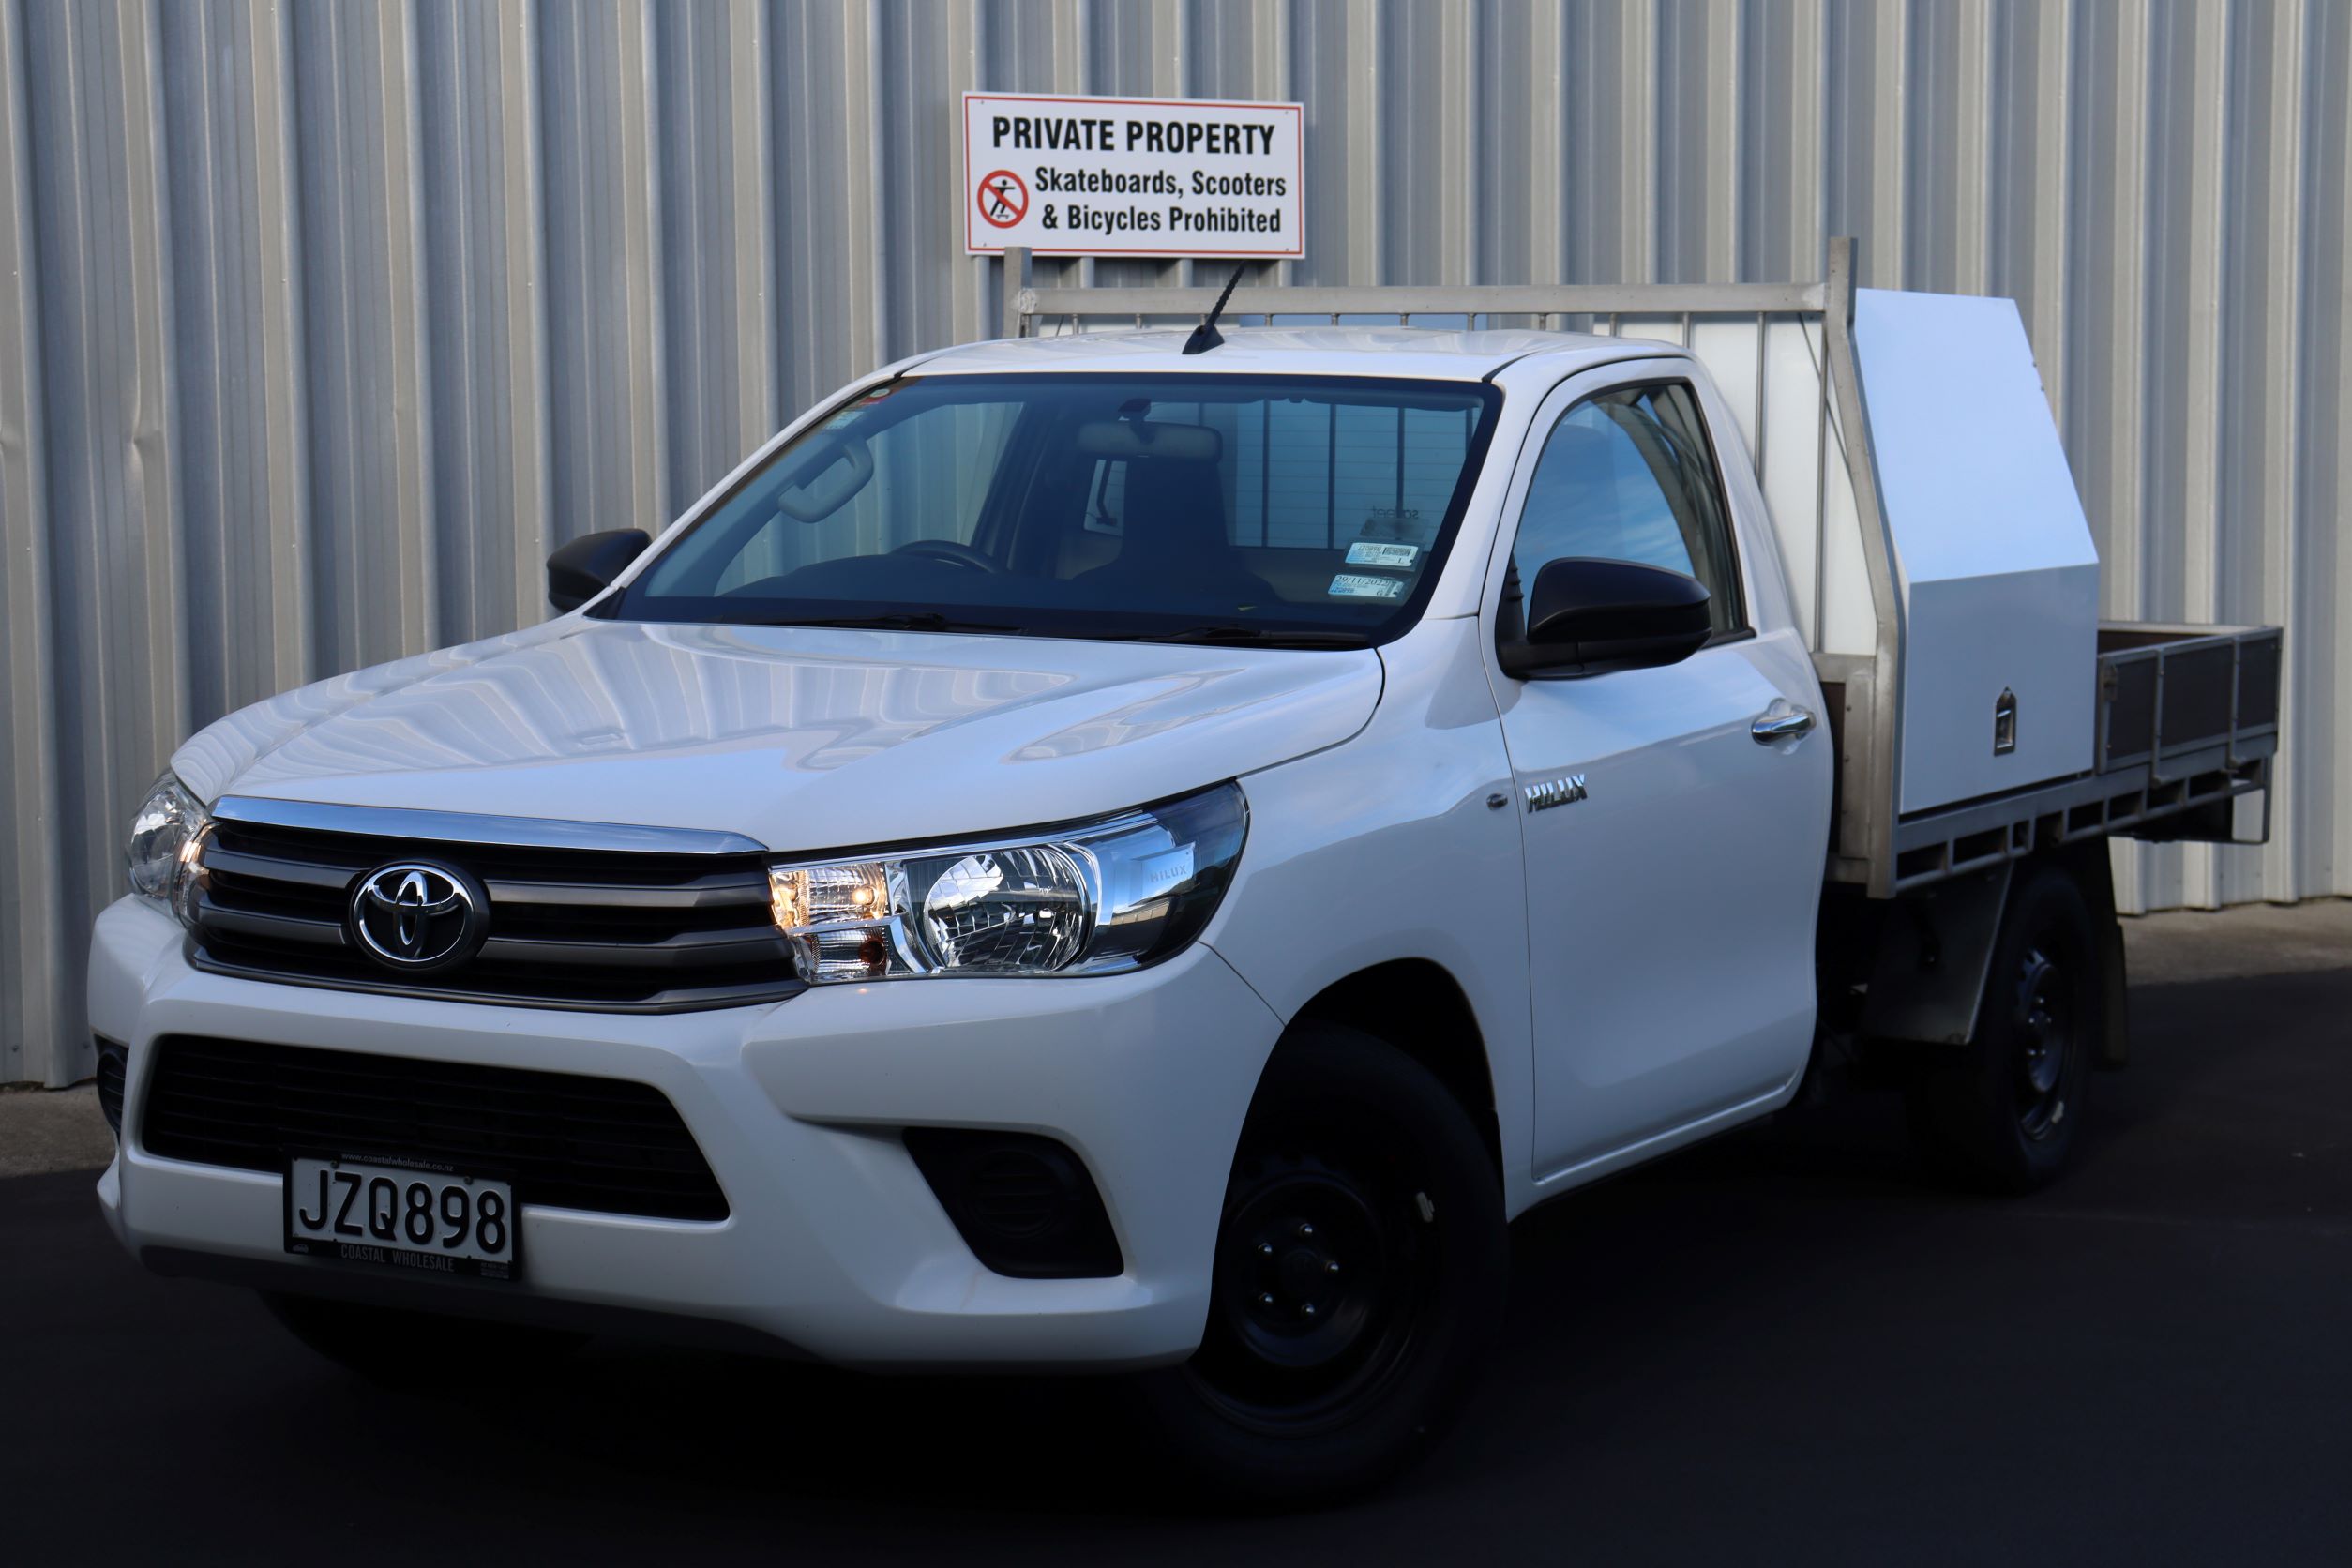 Toyota Hilux Flatdeck Service Body set up 2016 for sale in Auckland